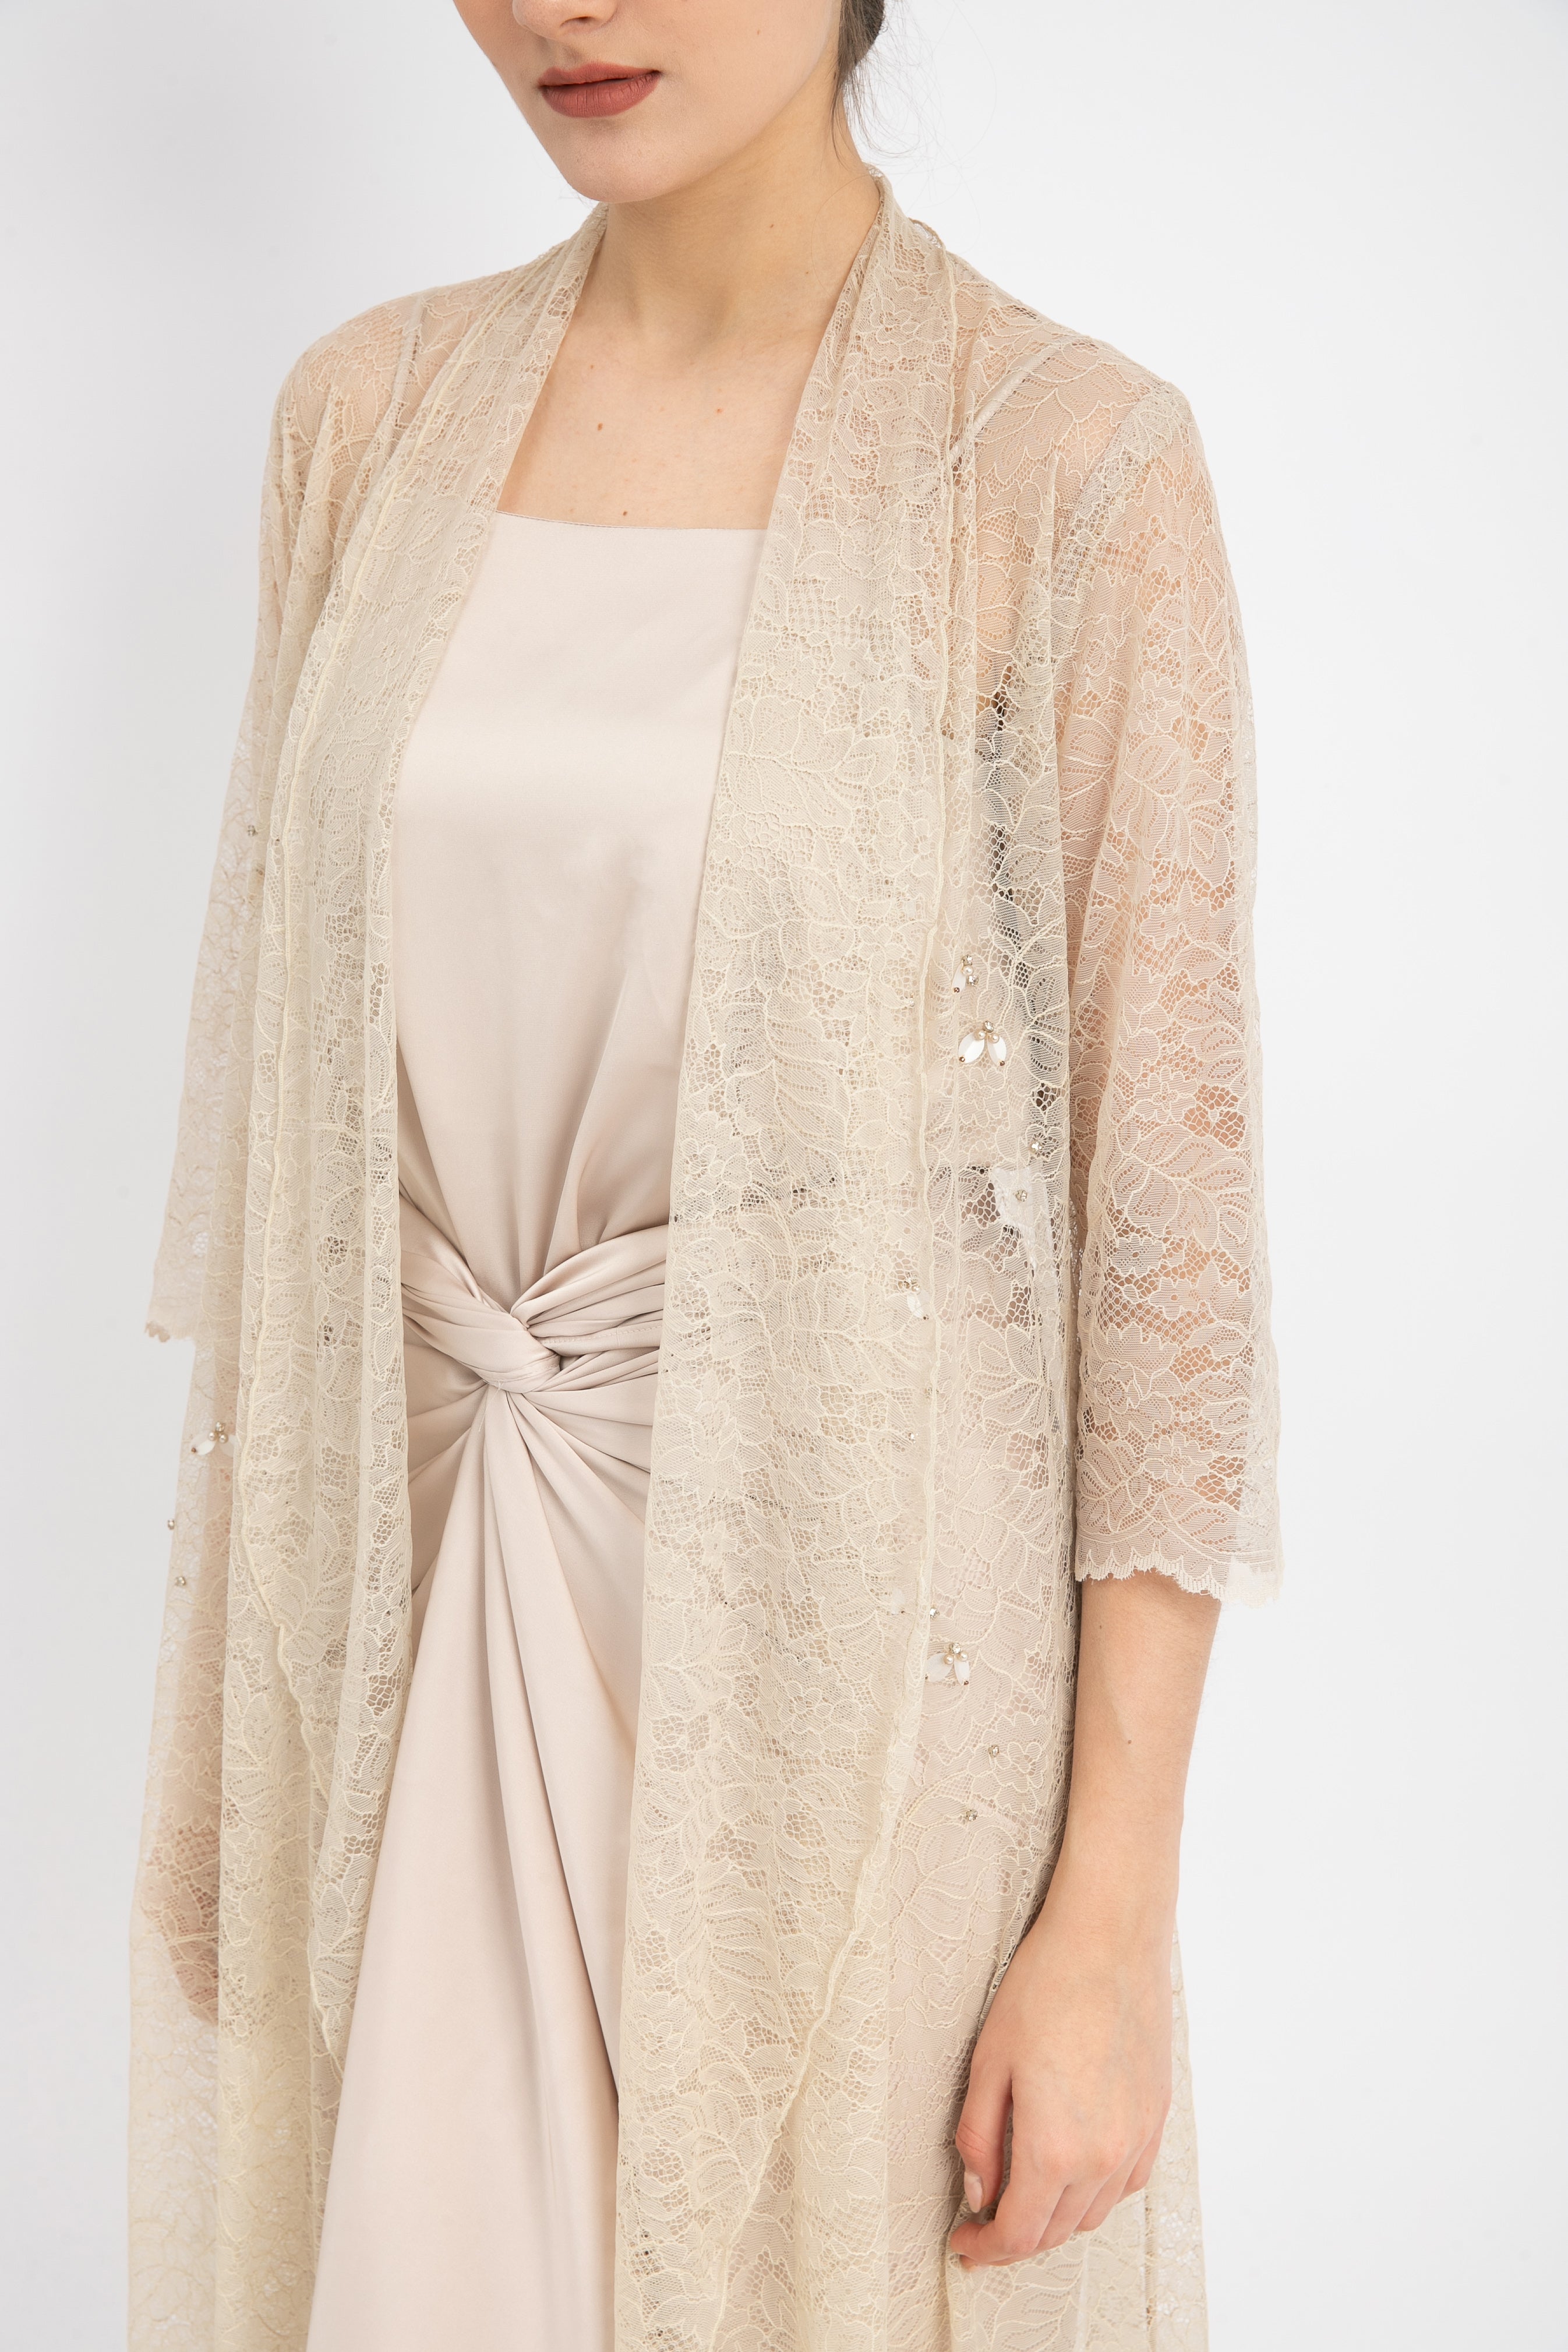 Theia Outer Top in Creme